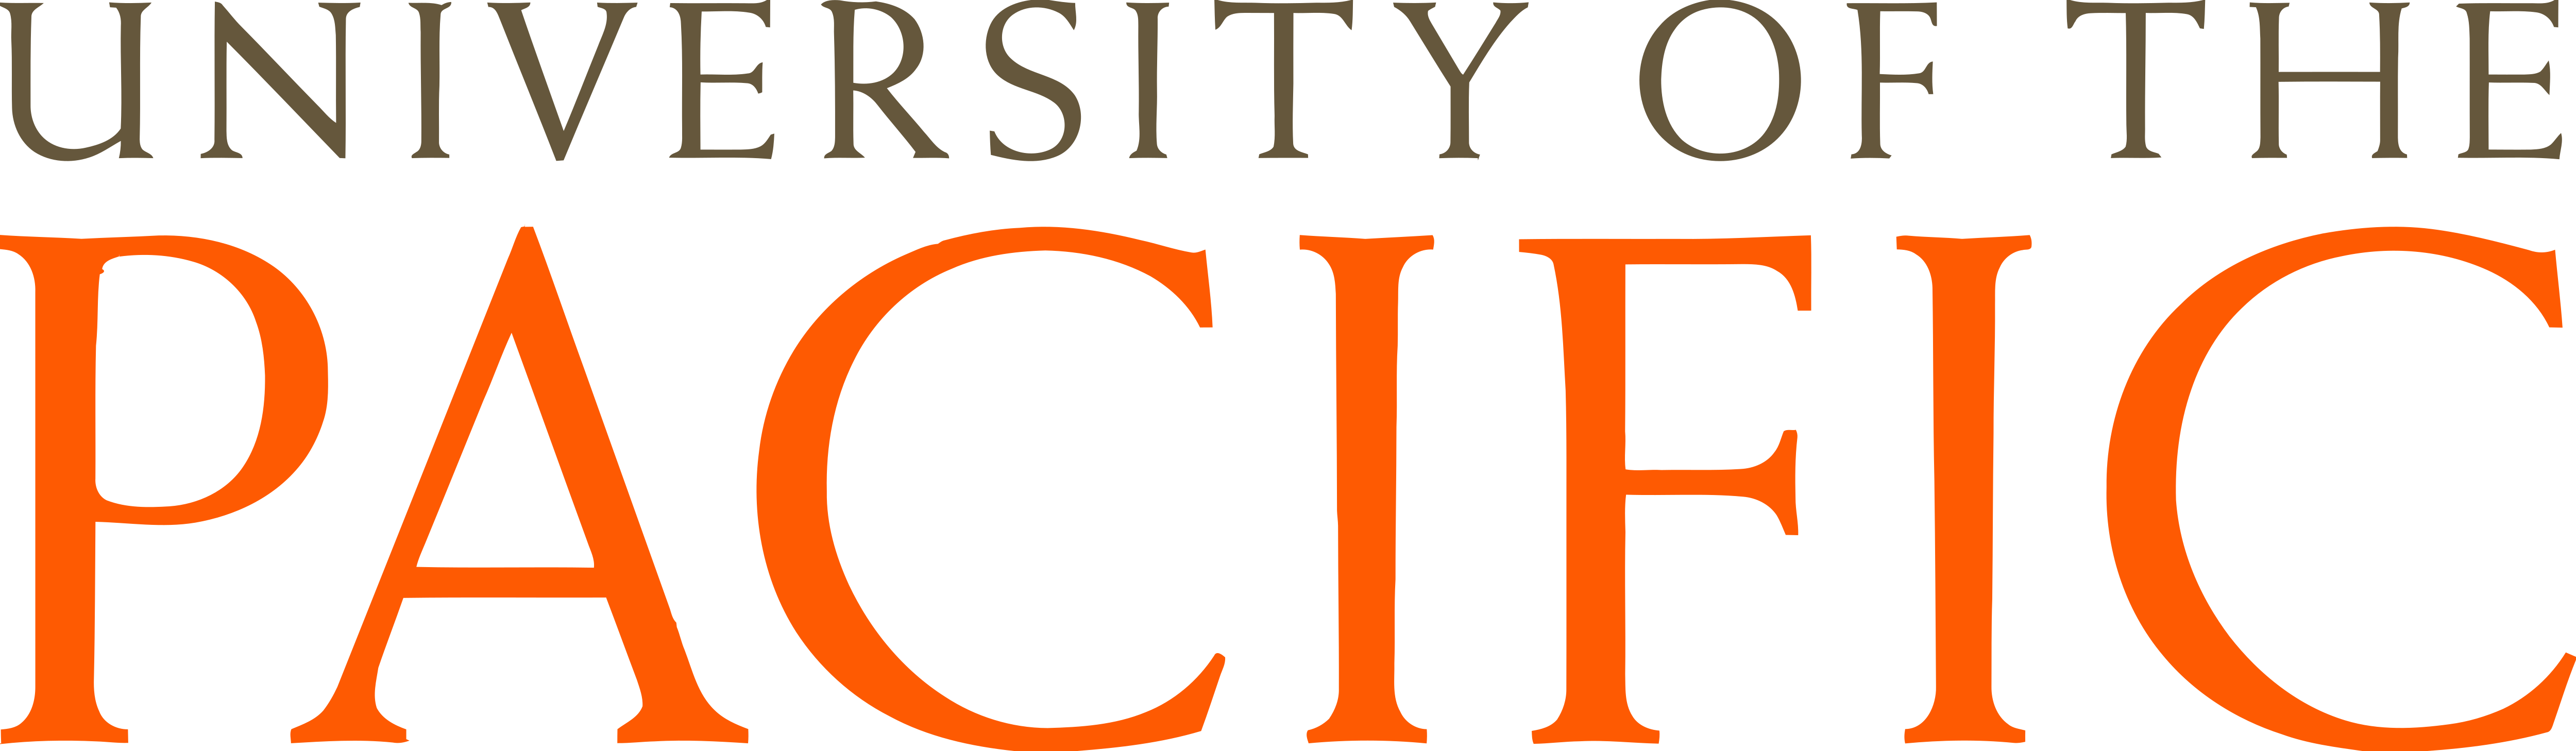 University of the Pacific – Logos Download